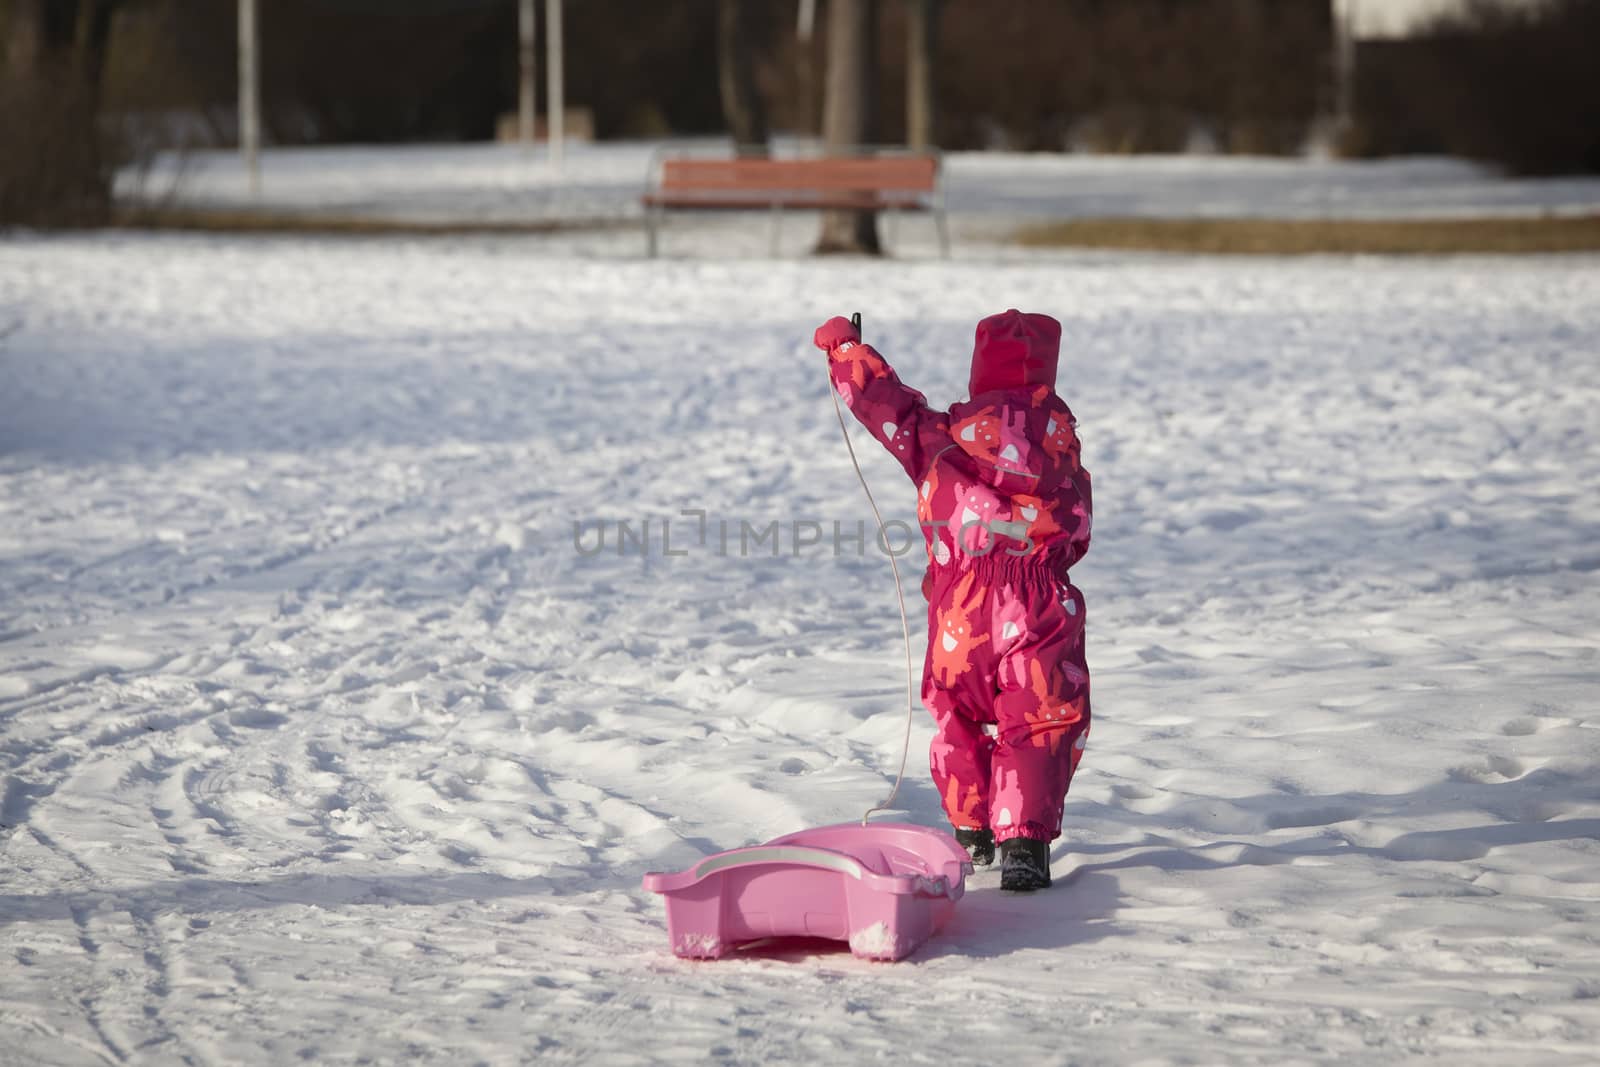 The girl pulls the sled behind her. Great time in winter.